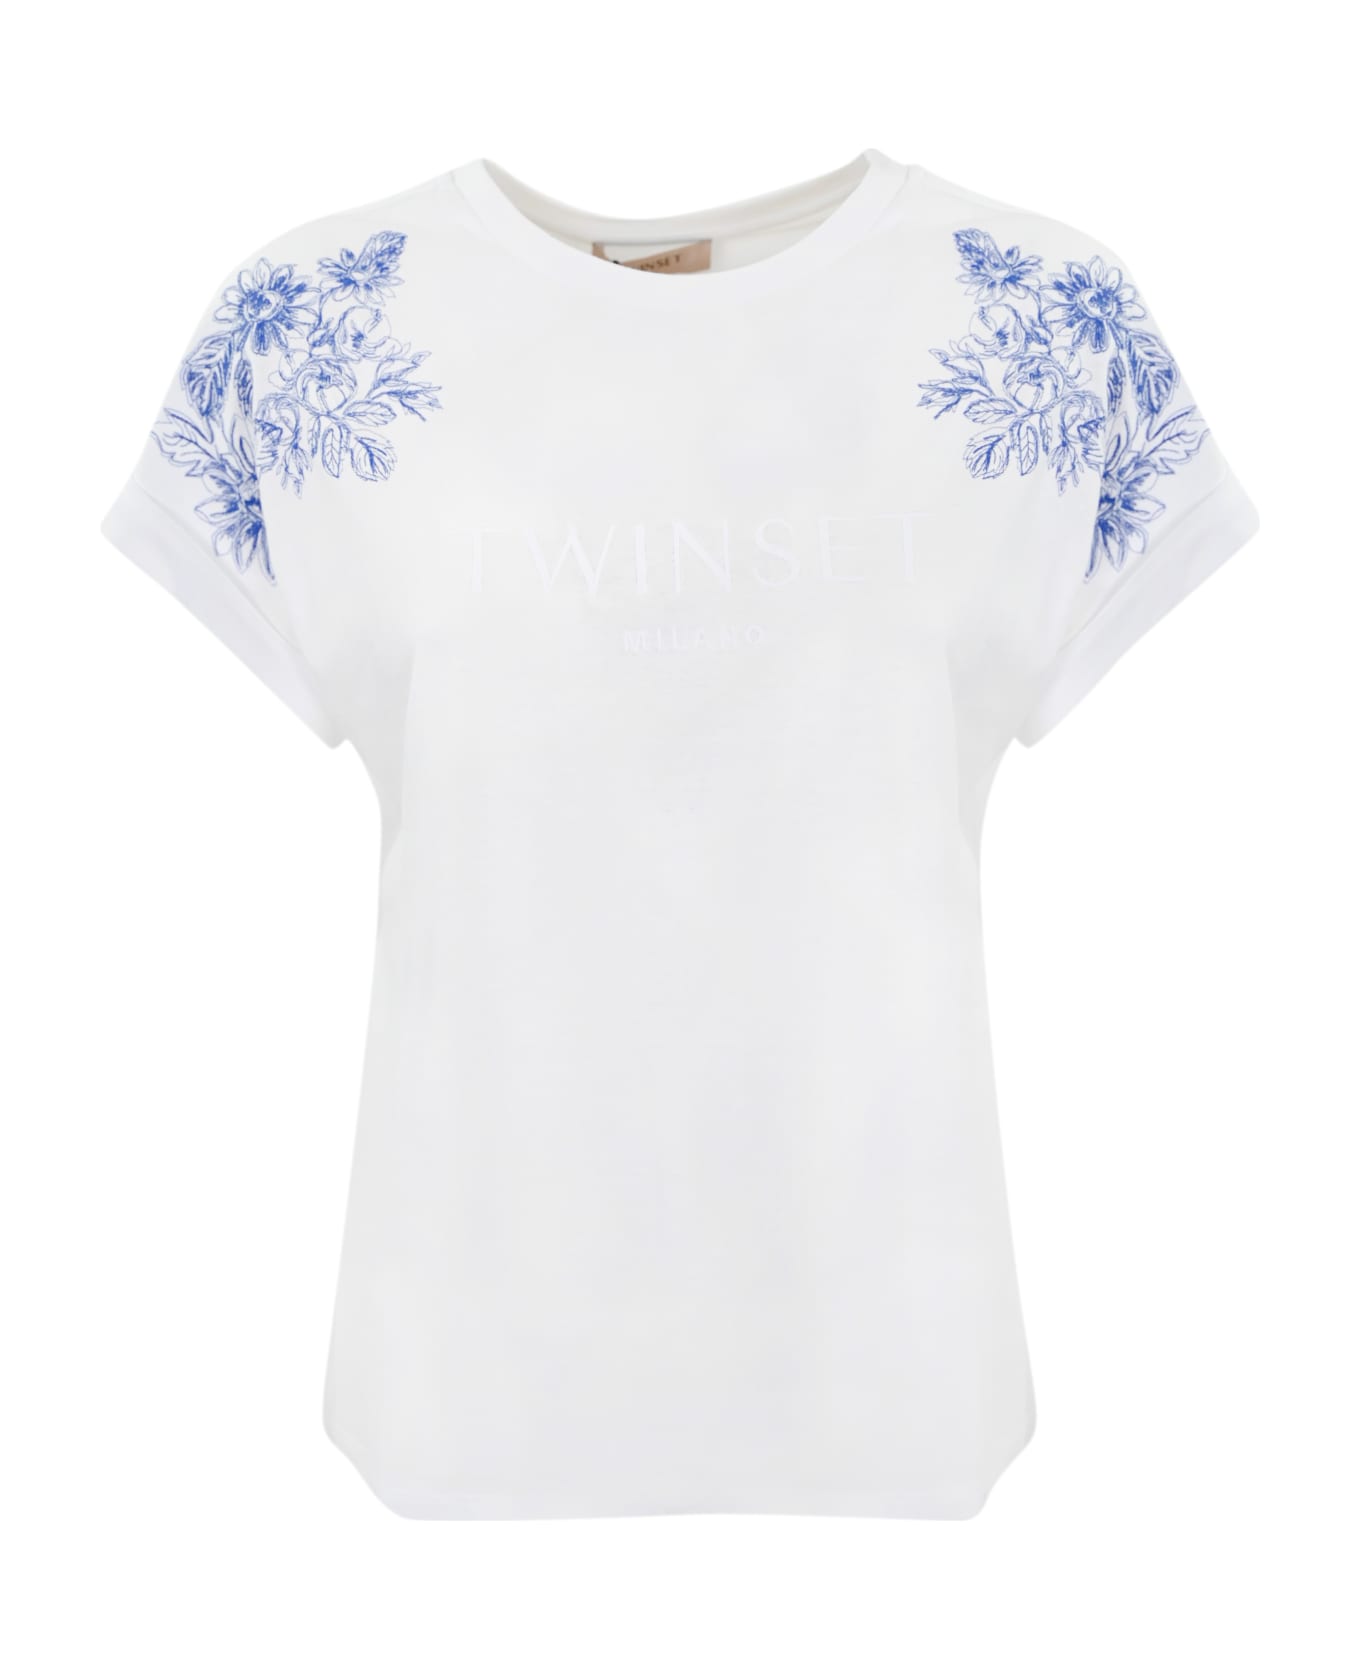 TwinSet T-shirt With Floral Embroidery - Ric.fiore blu/bianco